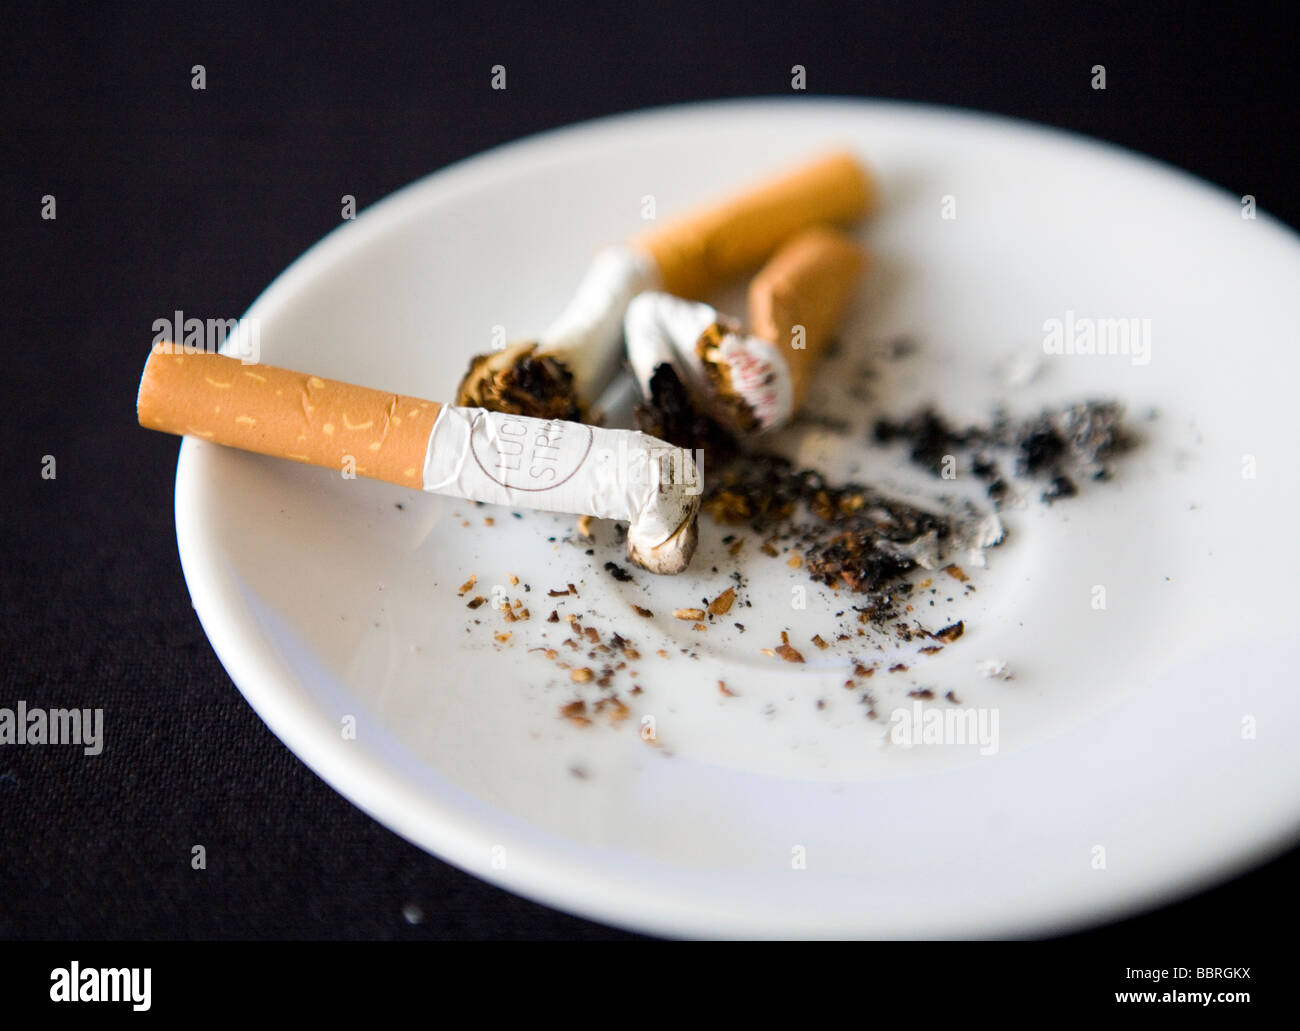 Cigarettes made by British American Tobacco in an ashtray Stock Photo